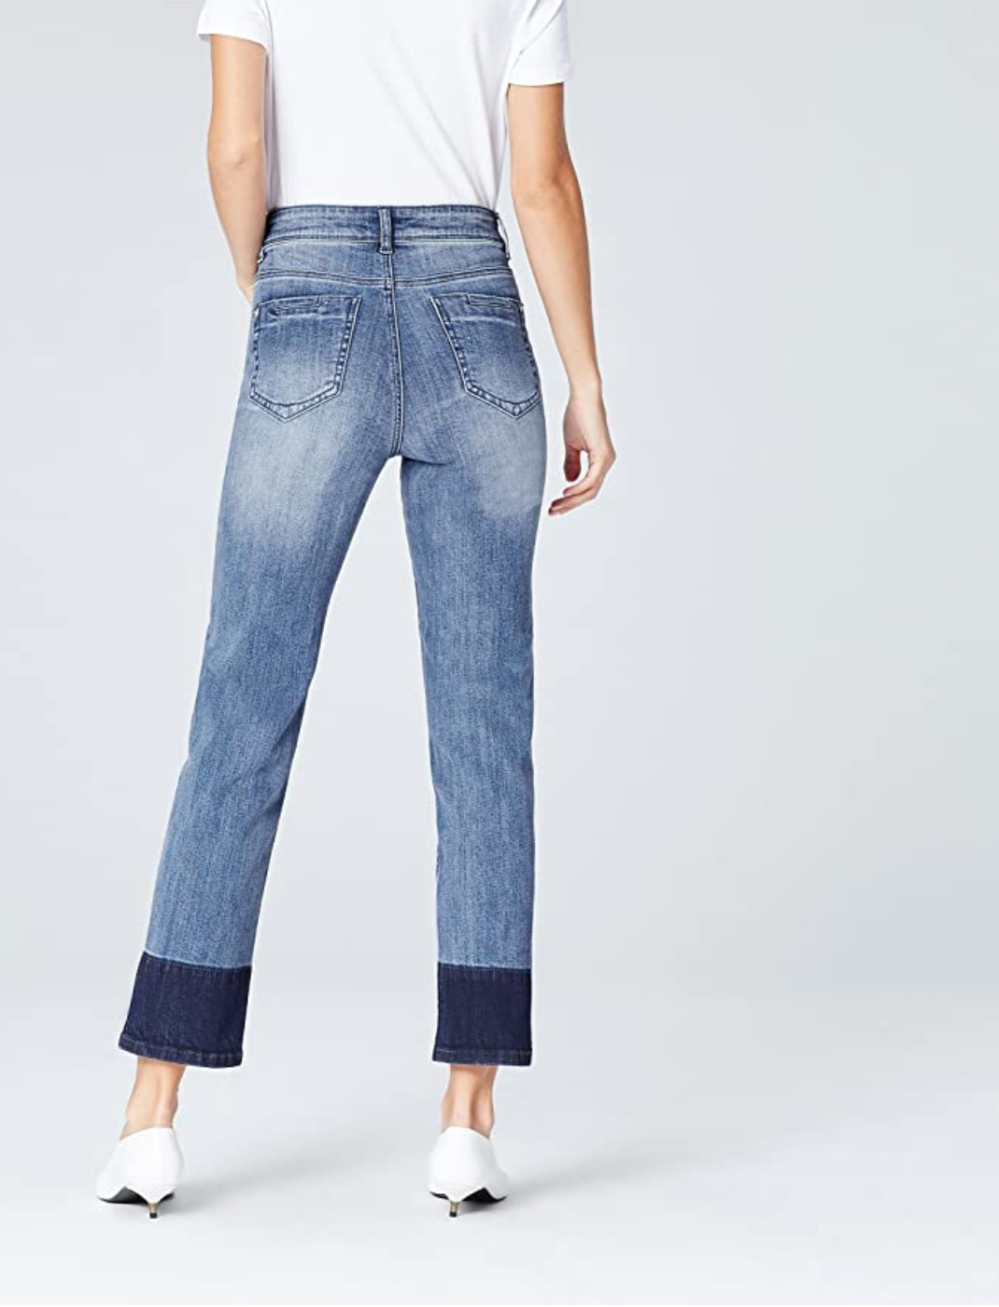 Find. Jeans Are on Major Sale Ahead of Black Friday — Just $22 | Us Weekly